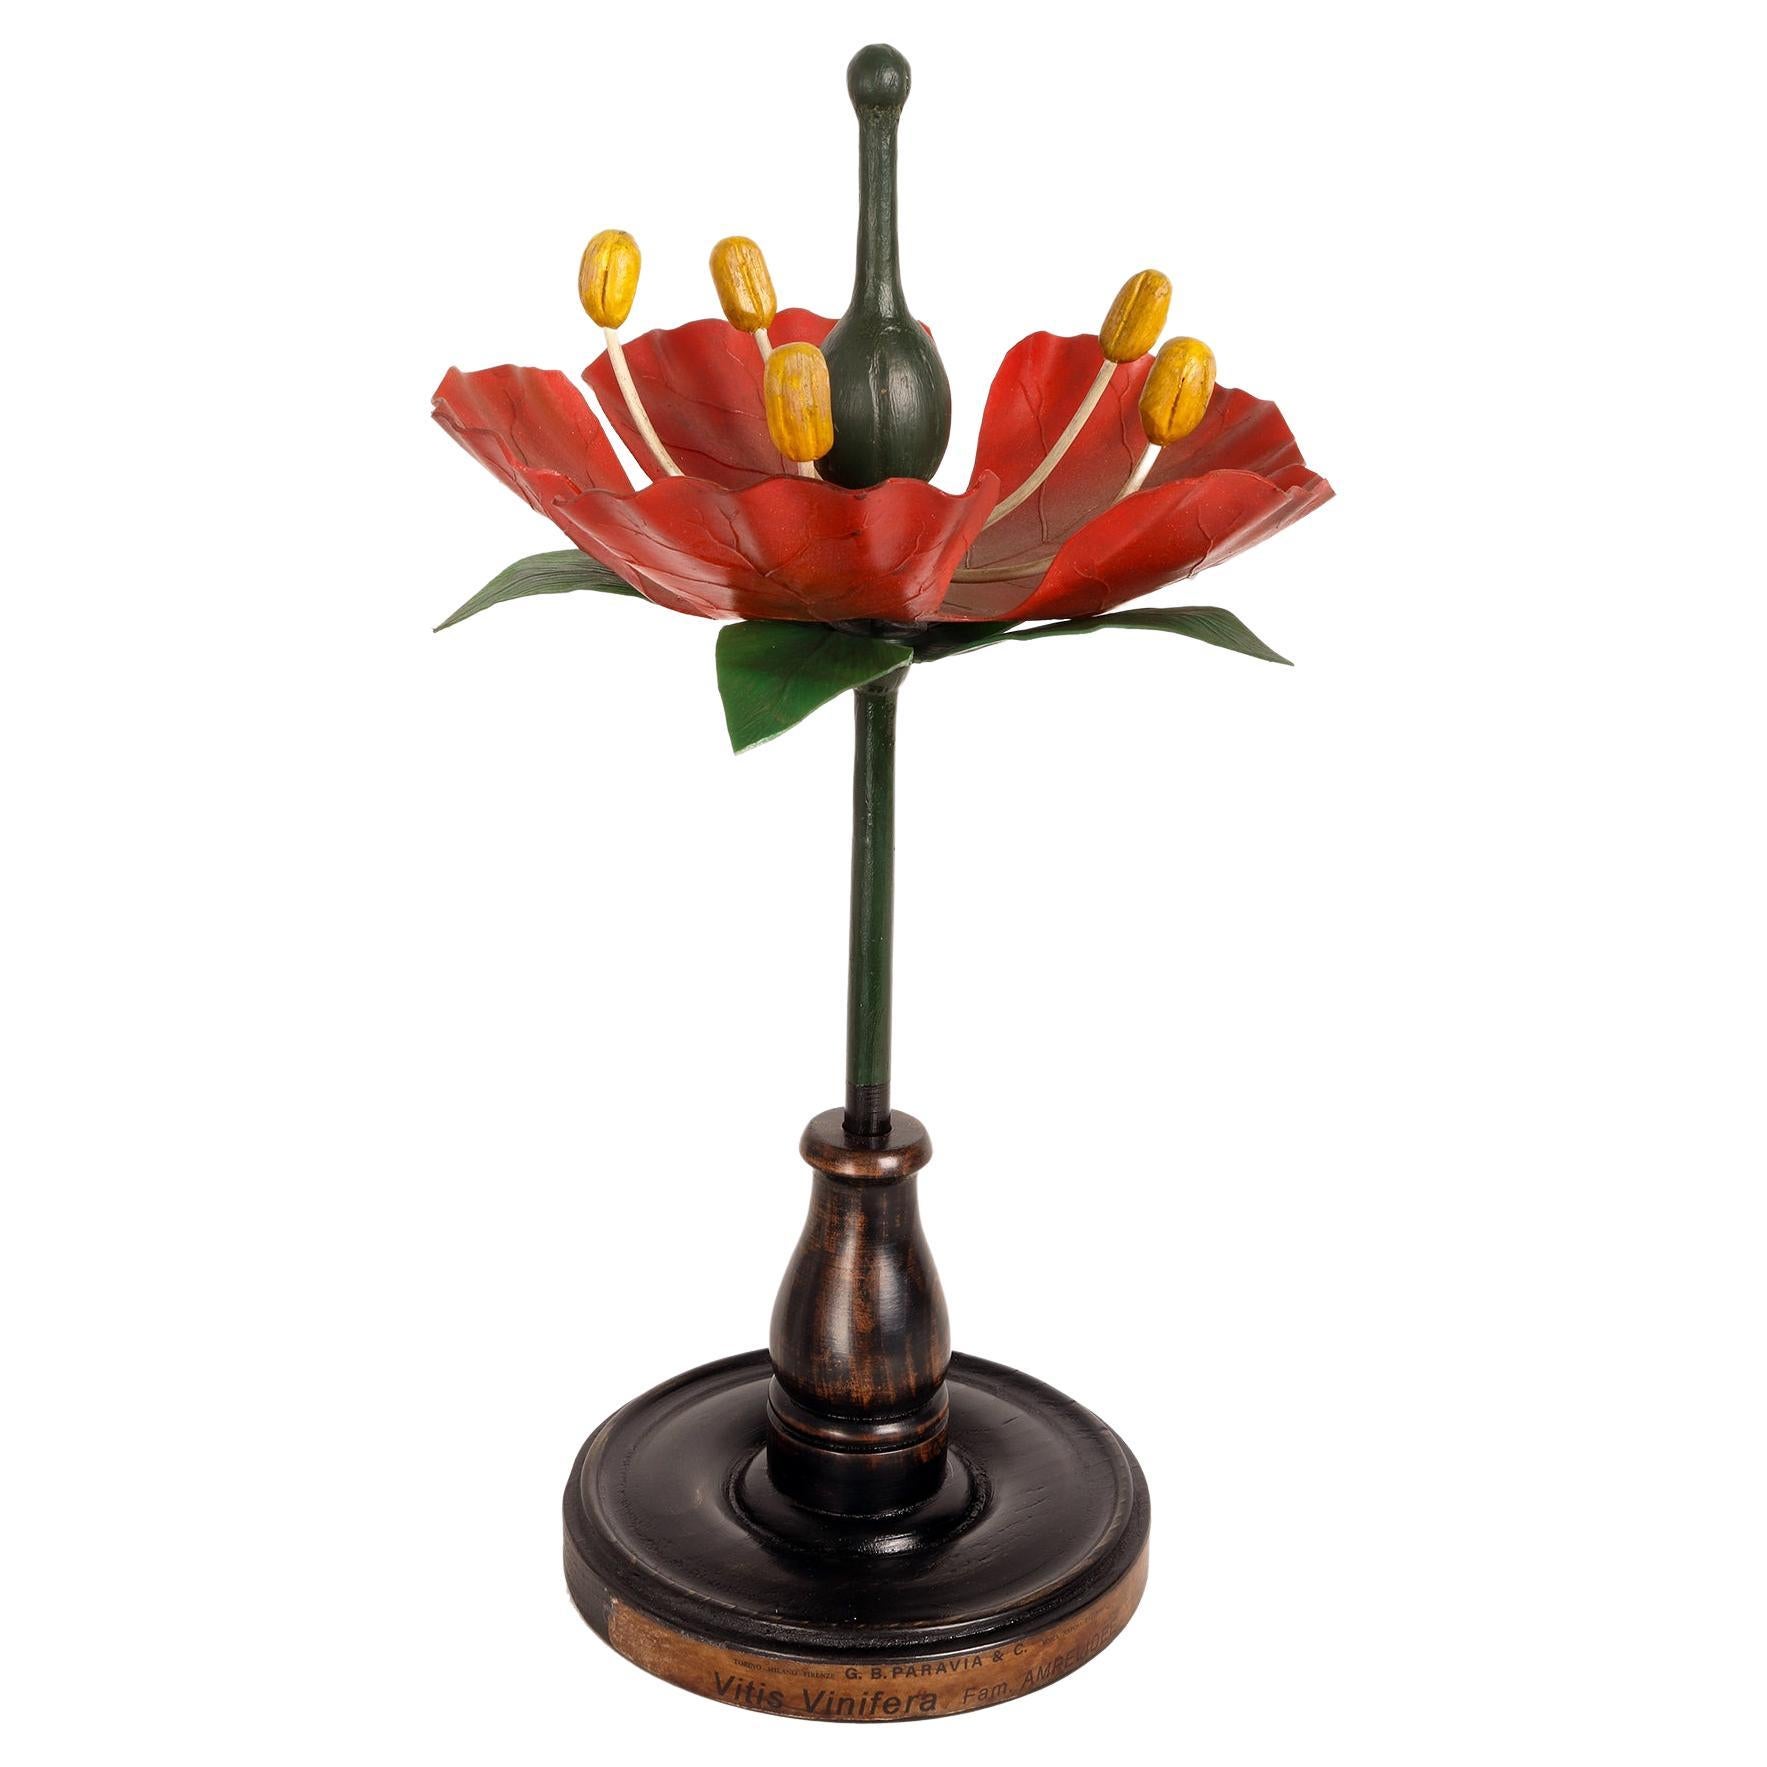 Botanic Model of a Red Grape Flower, Paravia, Italy, 1940 For Sale